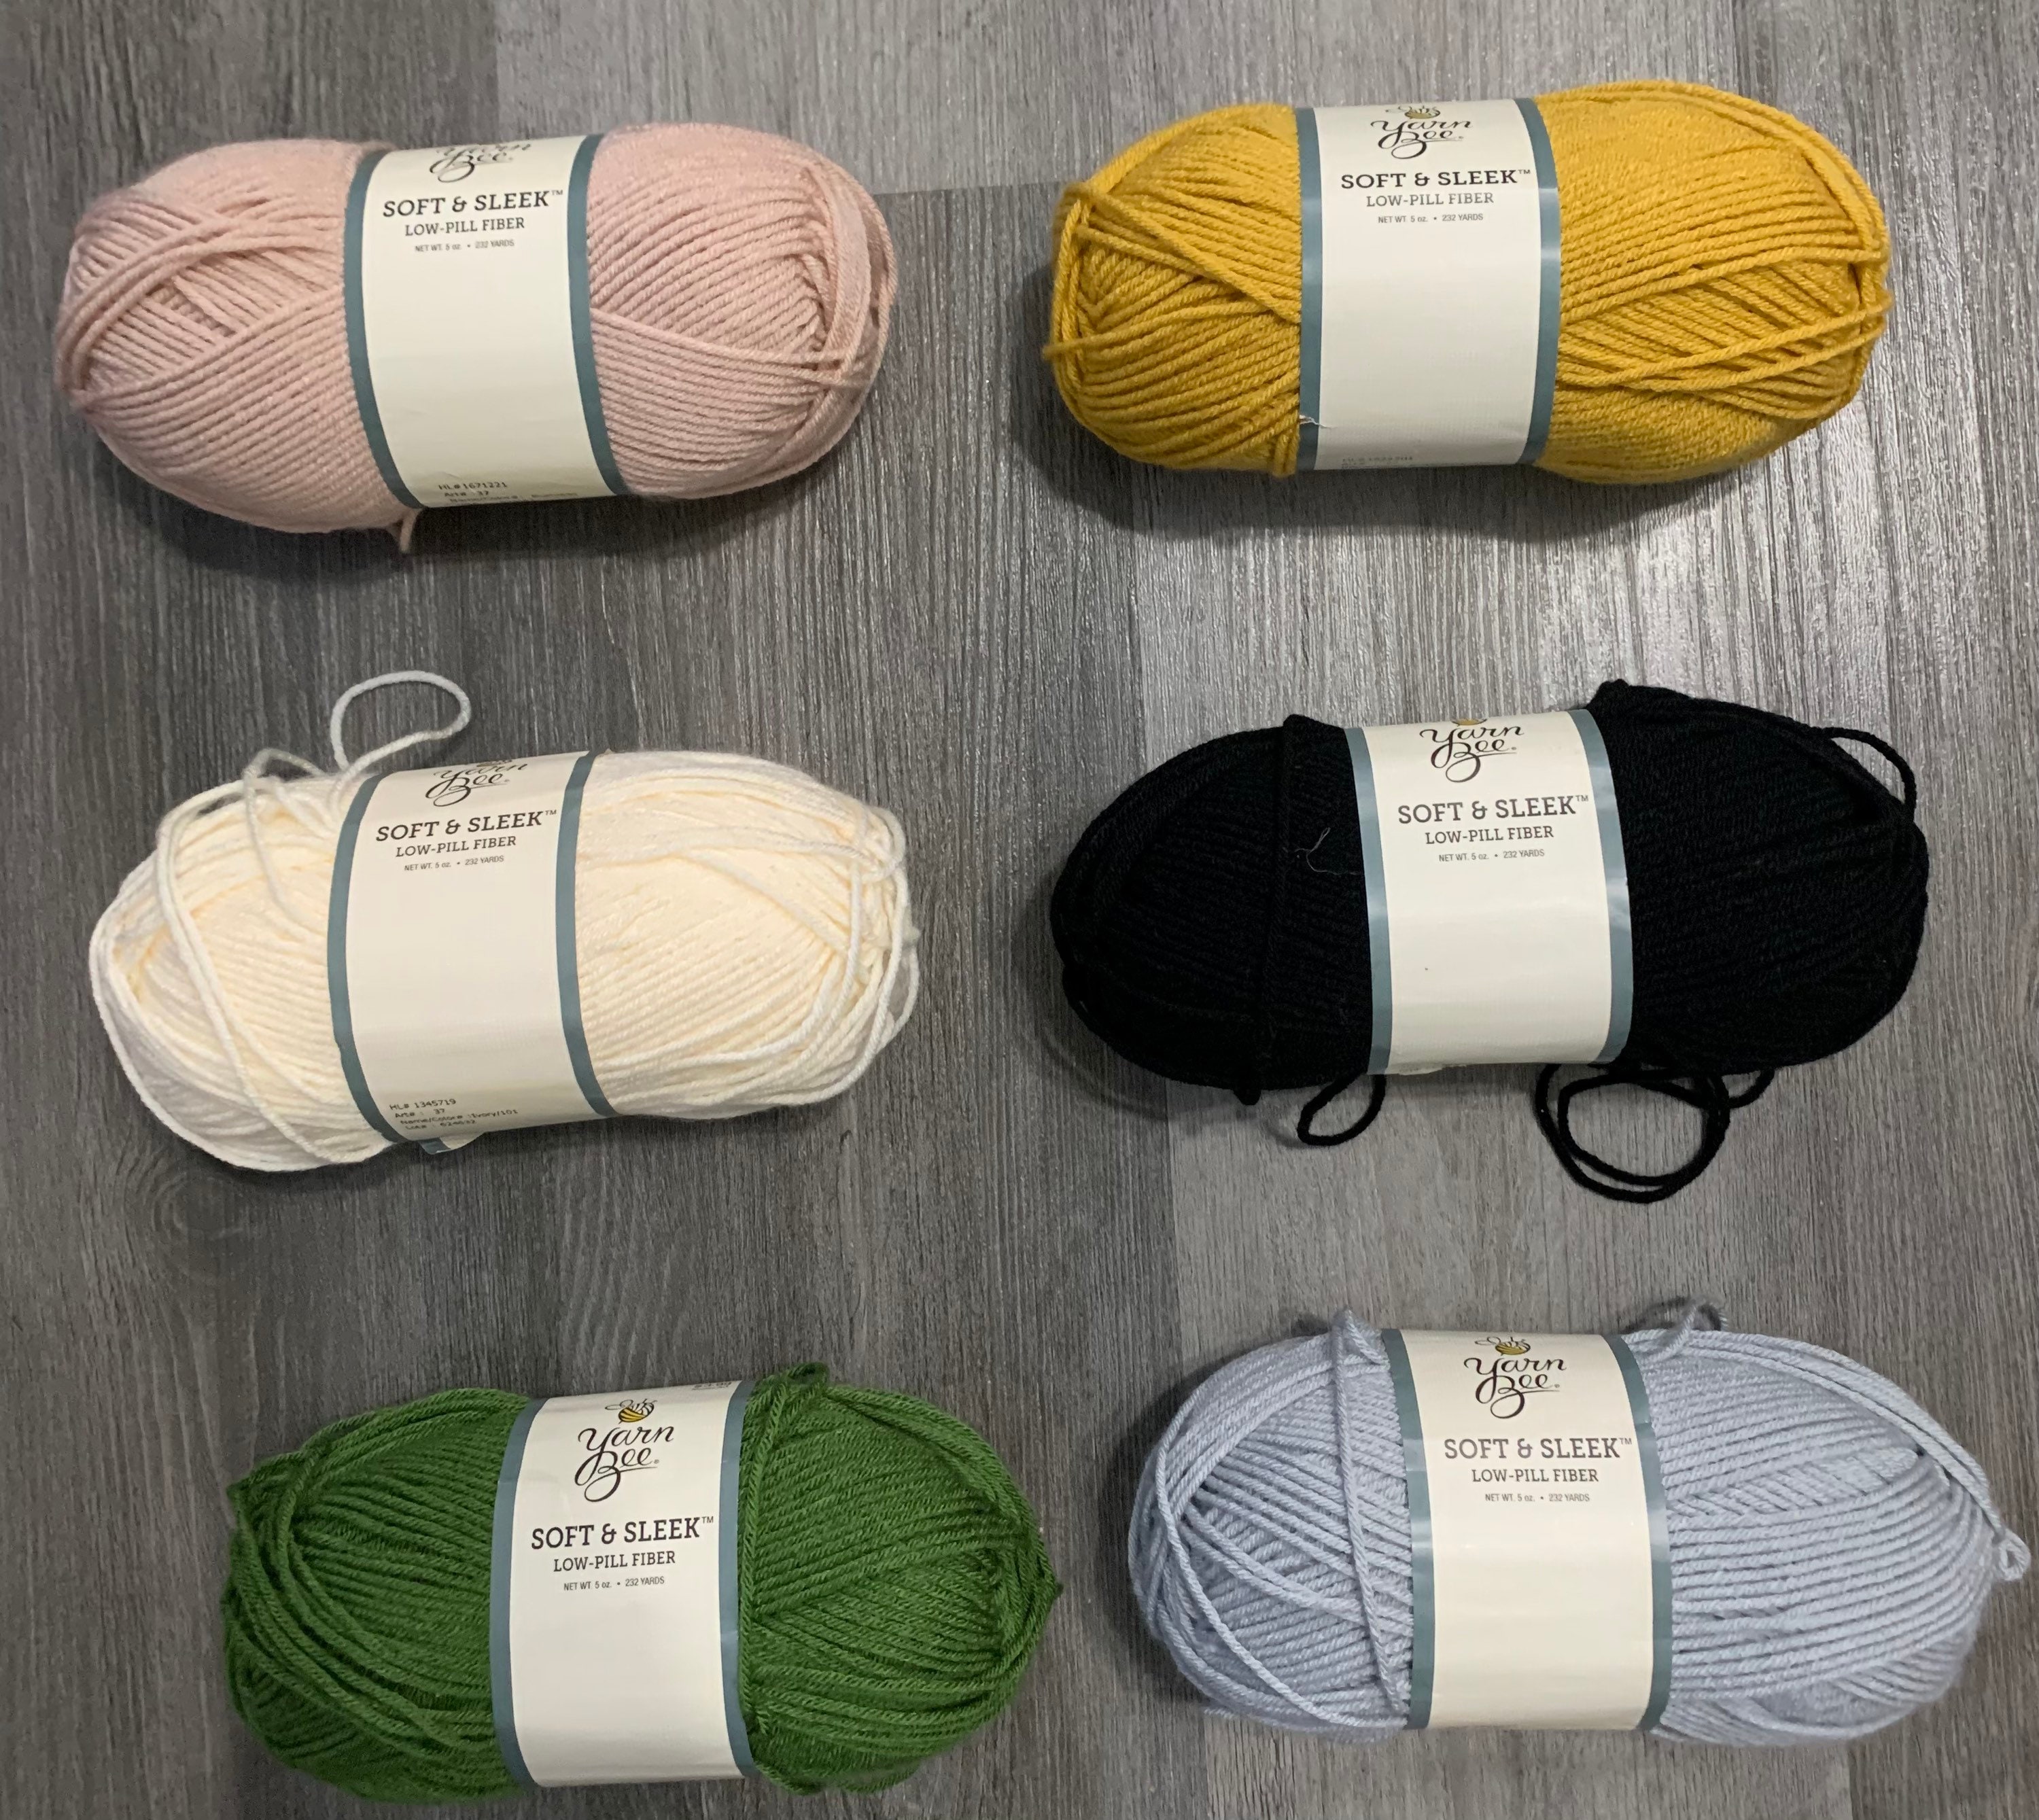 I was lured into using this Soft and Sleek “low-pill” yarn by YarnBee